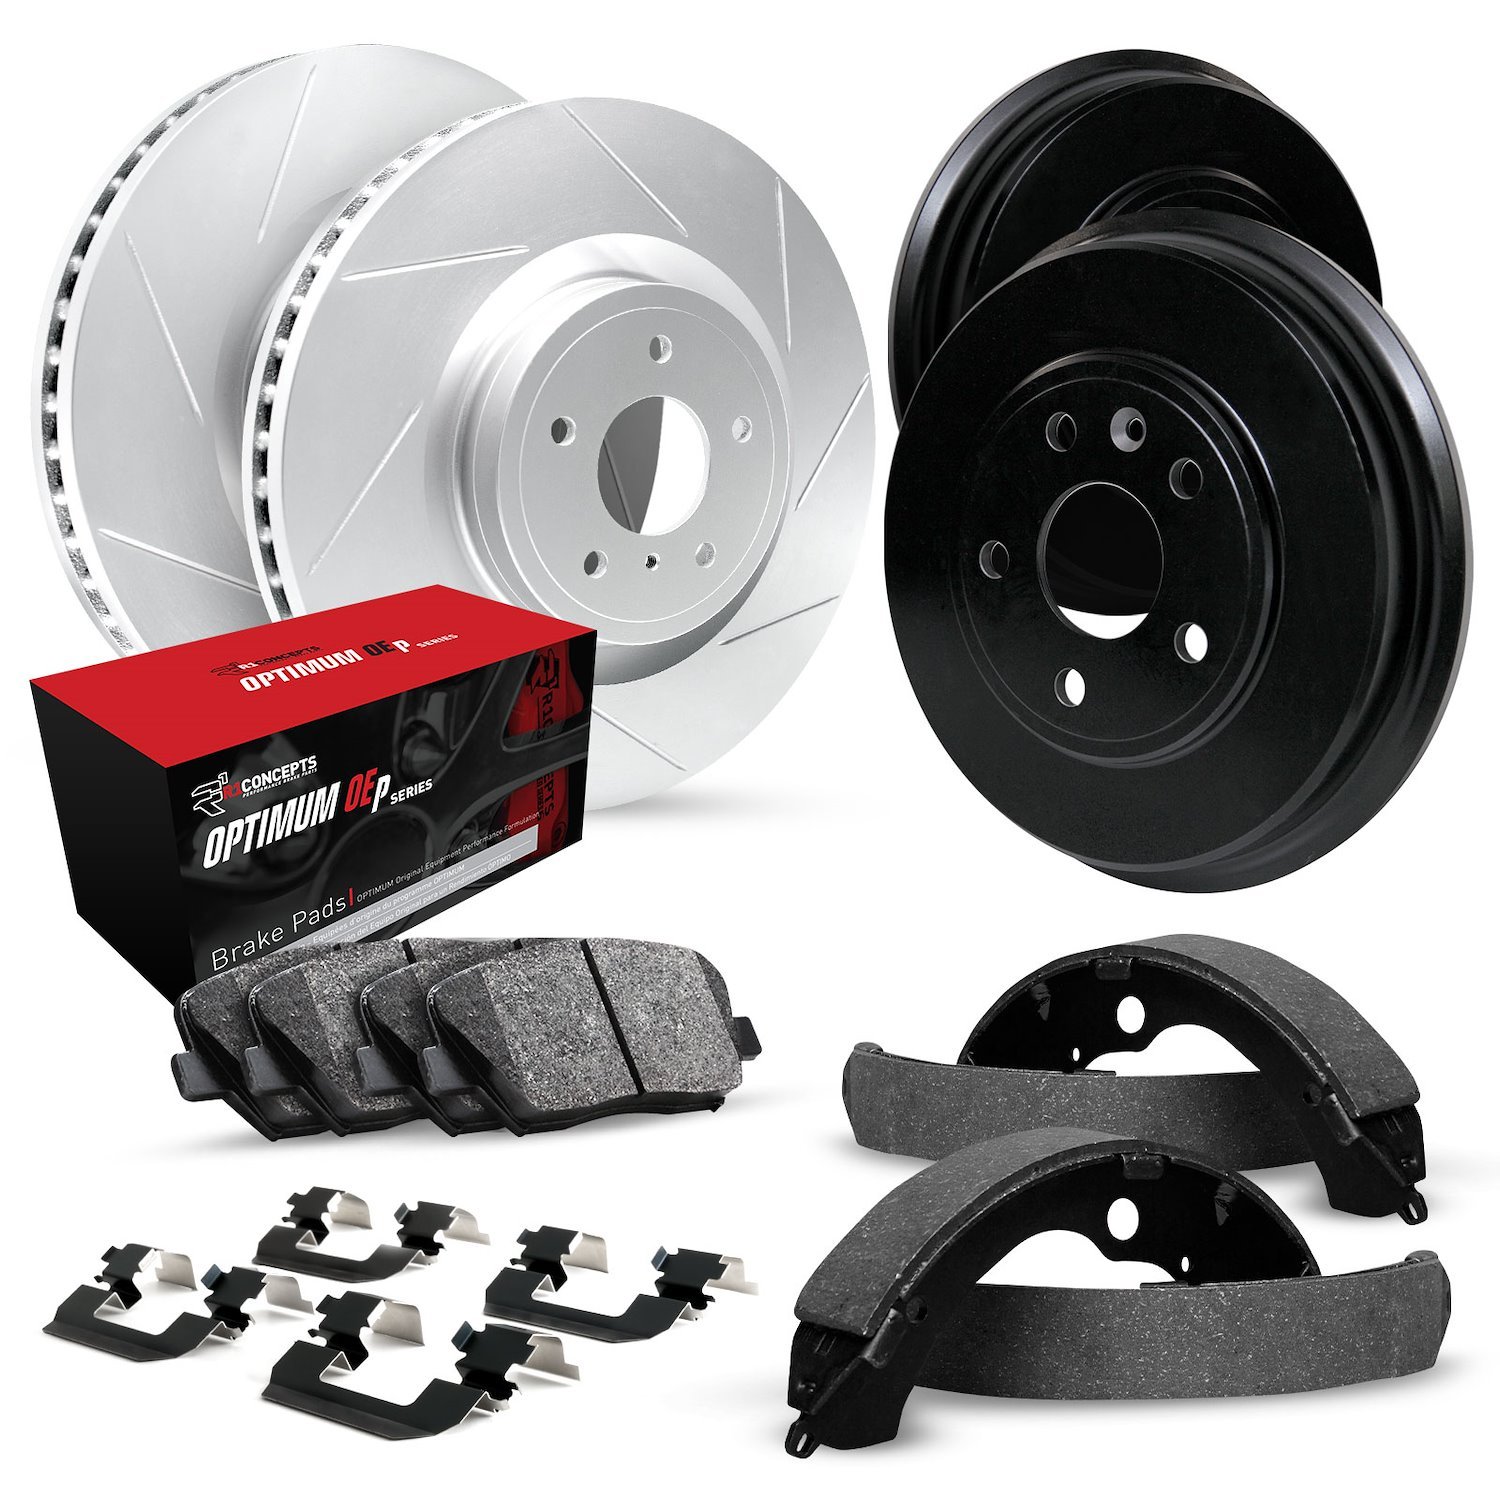 GEO-Carbon Slotted Brake Rotor & Drum Set w/Optimum OE Pads, Shoes, & Hardware, 1972-1973 GM, Position: Front & Rear